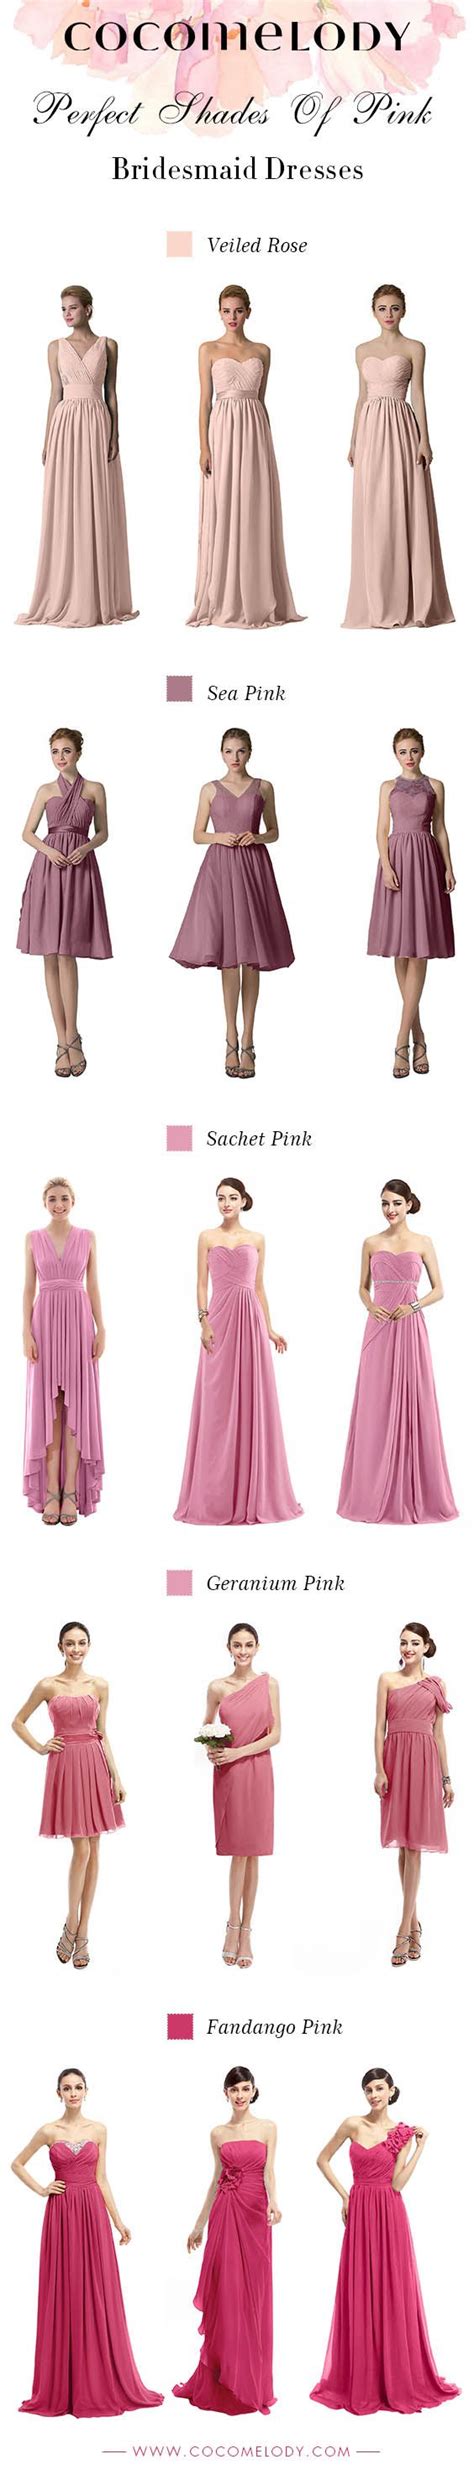 Perfect Shades Of Pink Bridesmaid Dresses All Sizes And More Styles To